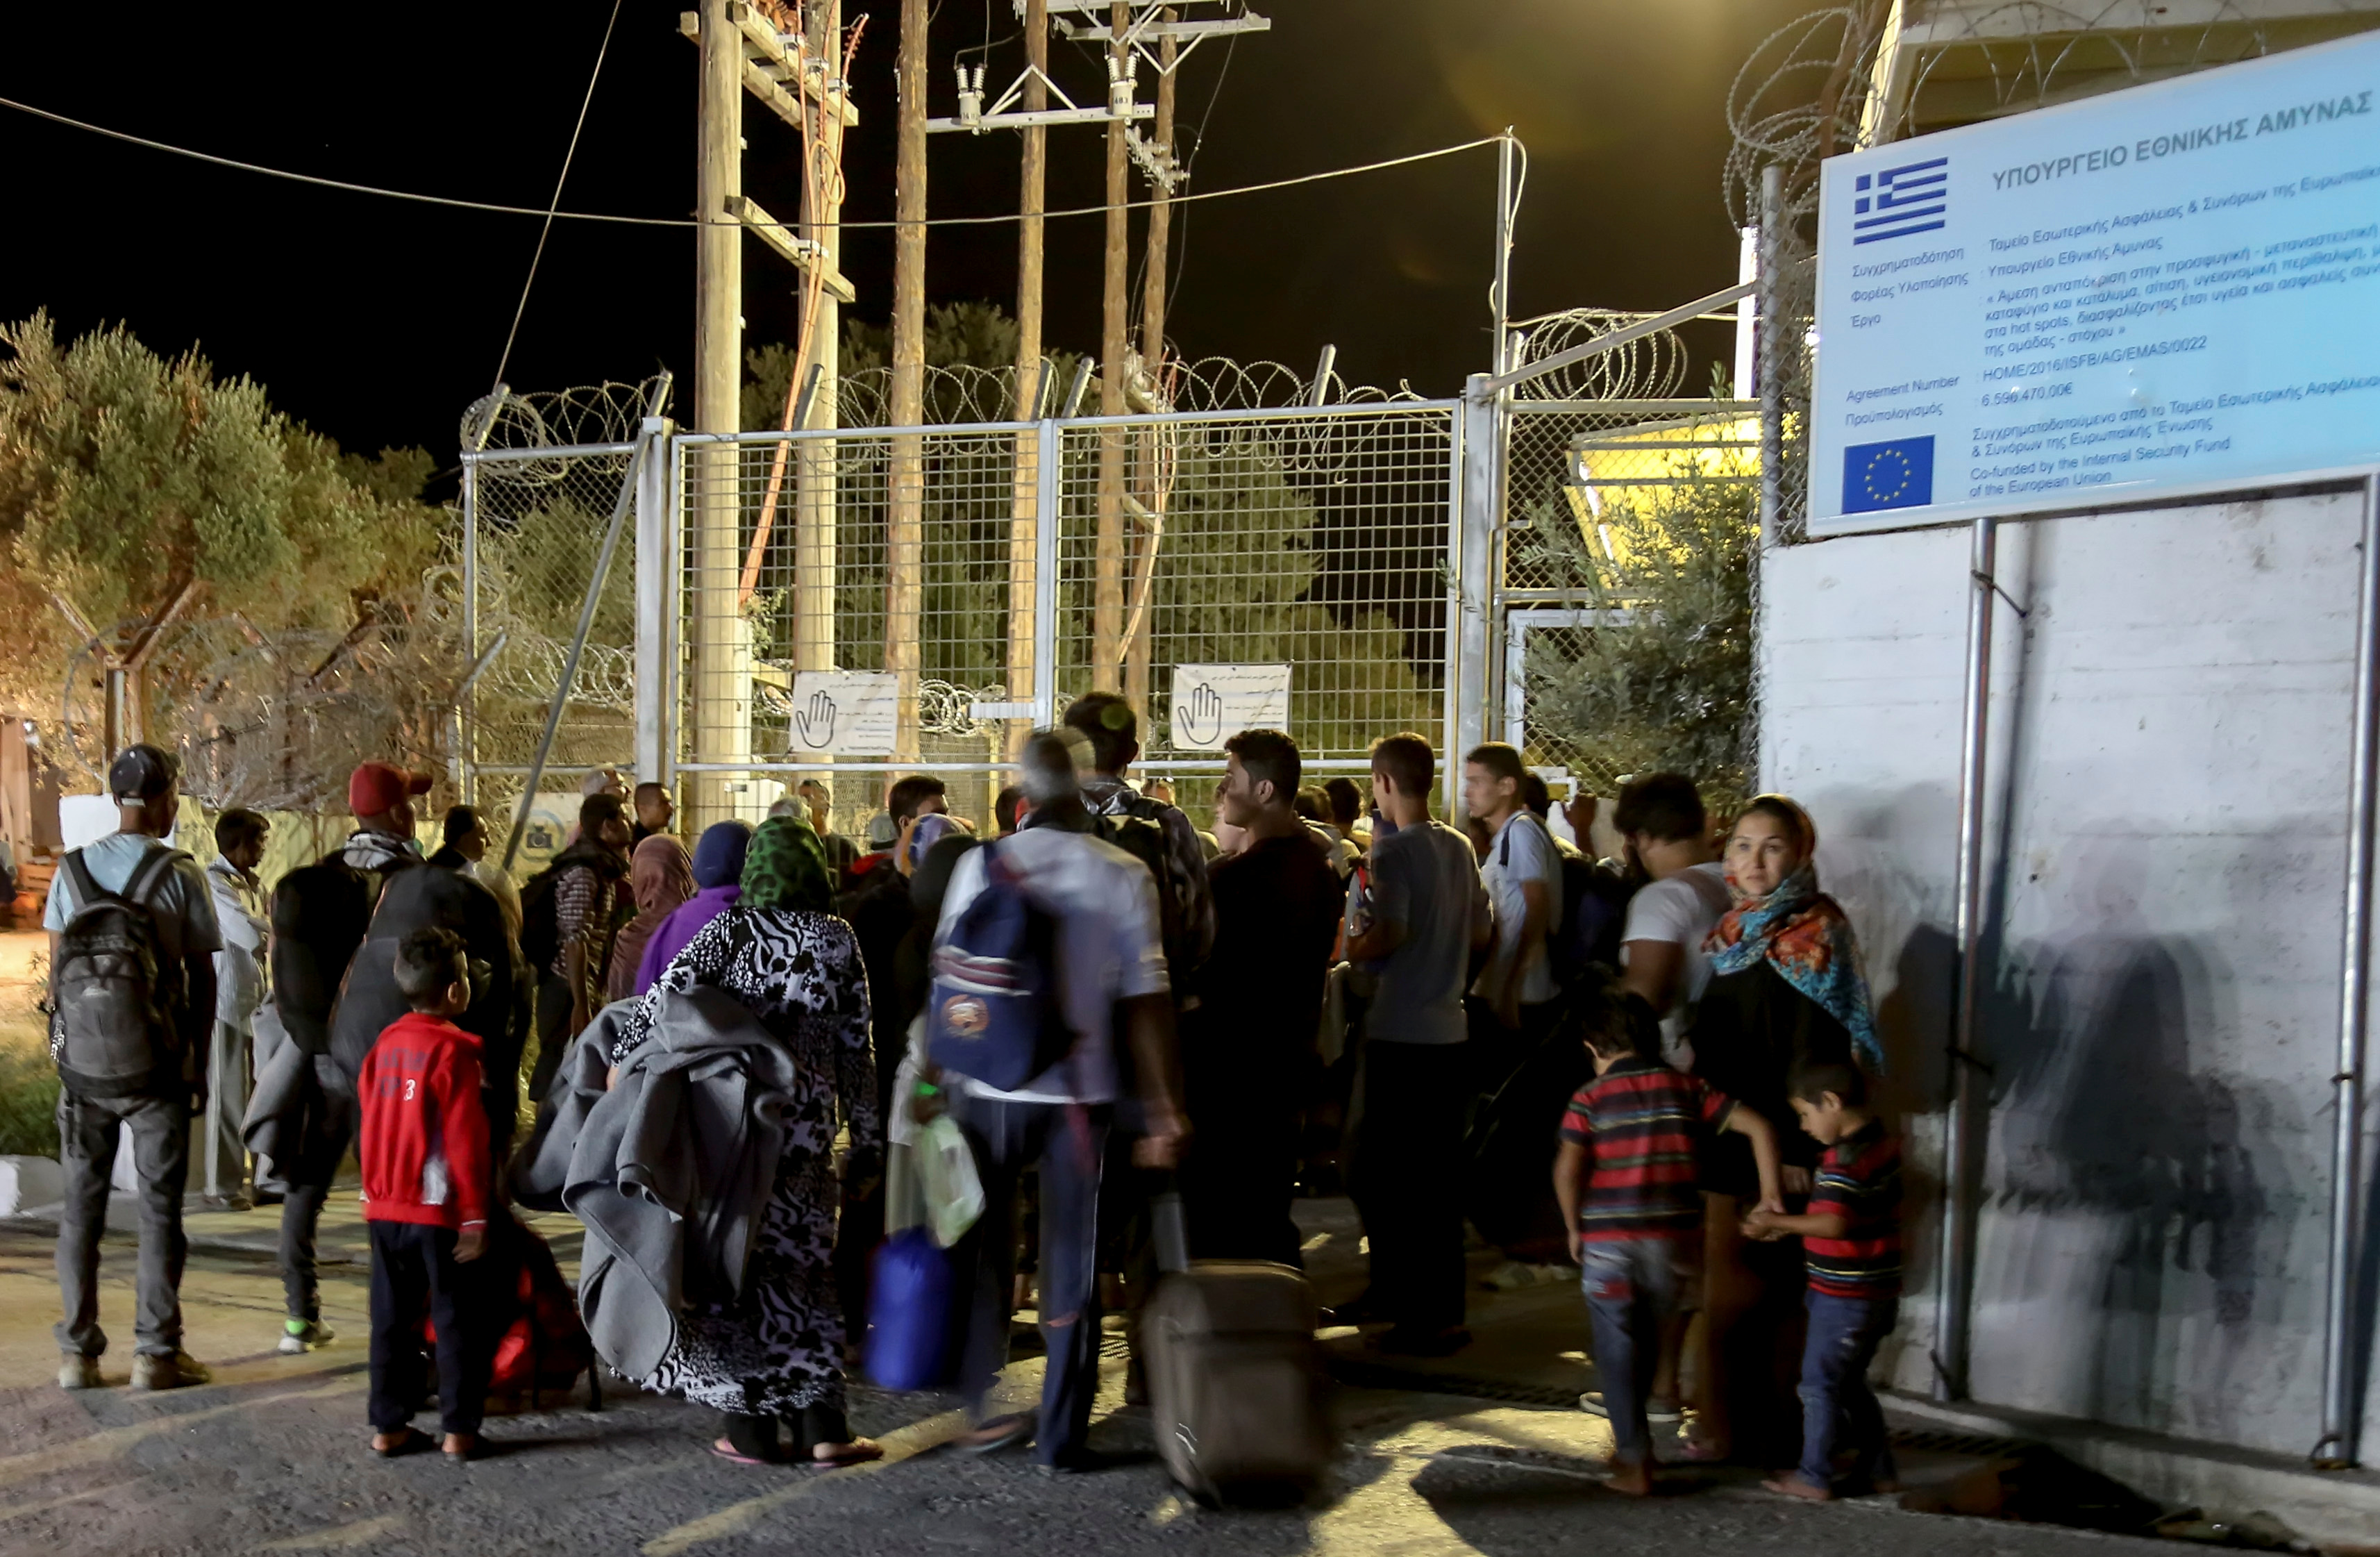 Refugees and migrants stand at the closed gate of the Moria migrant camp, after a fire at the facility, on the island of Lesbos, Greece, Sept. 19, 2016. (Manolis Lagoutaris—Intime/Reuters)